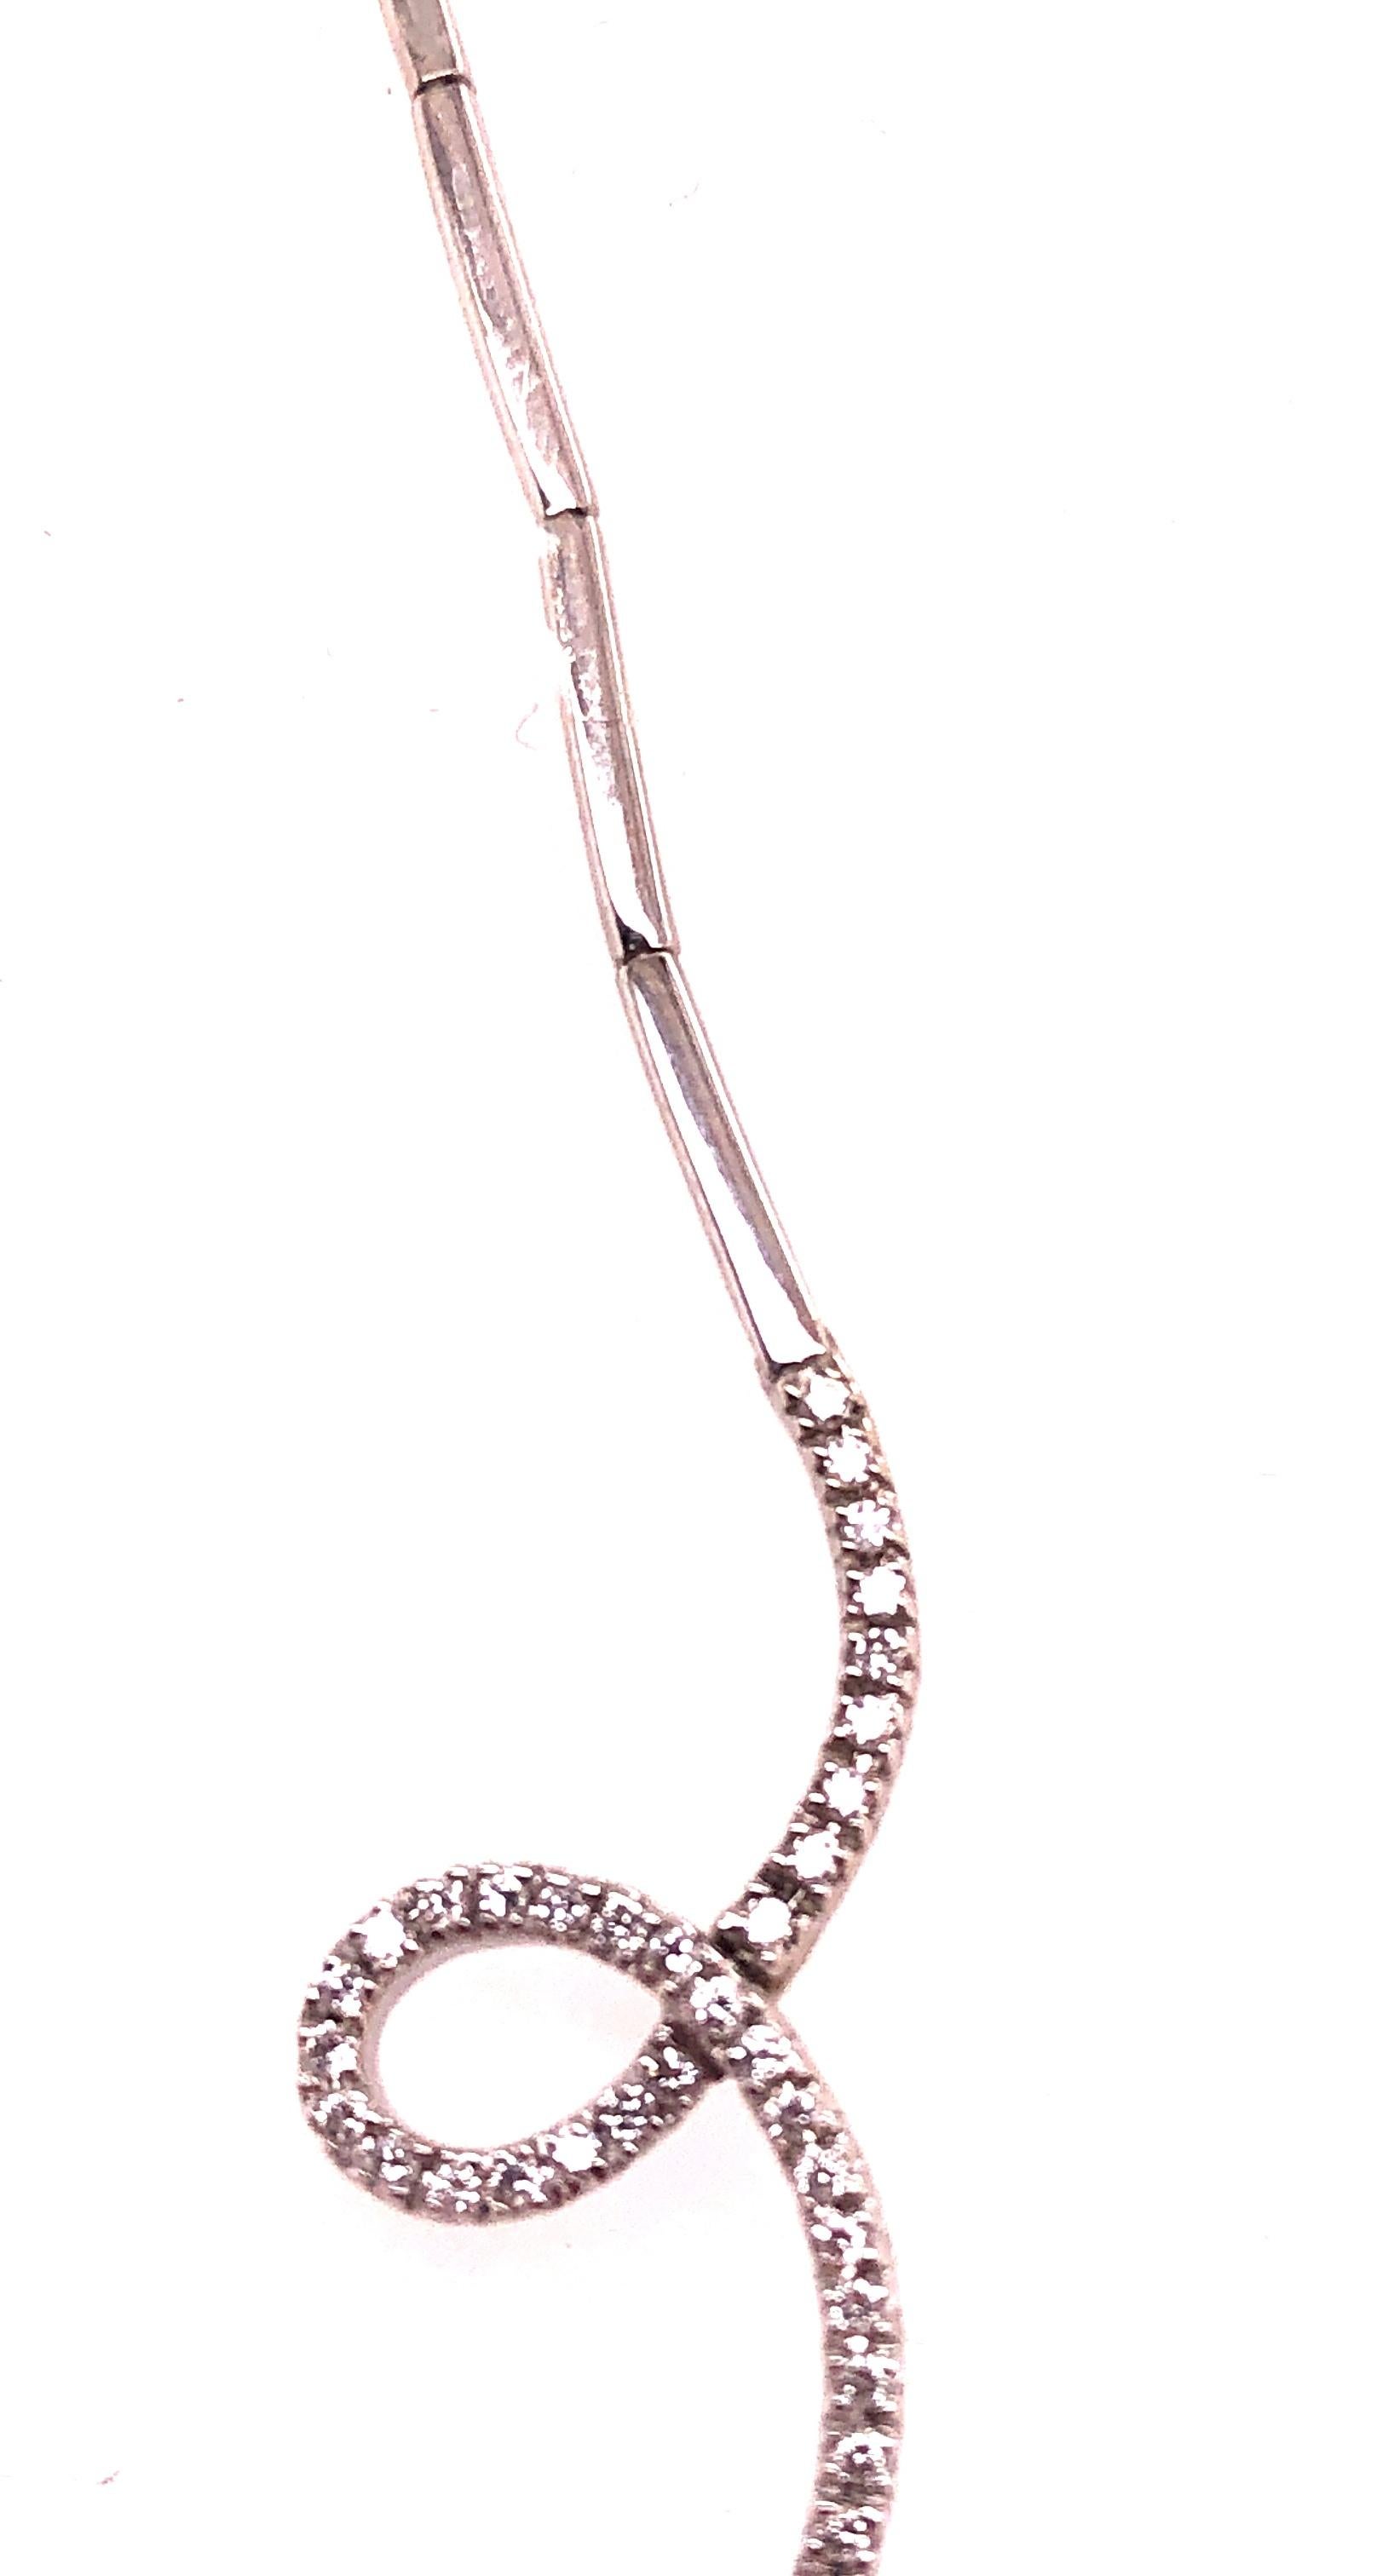 18 Karat White Gold and Diamond Swirl Necklace by H2 at Hammerman For Sale 2